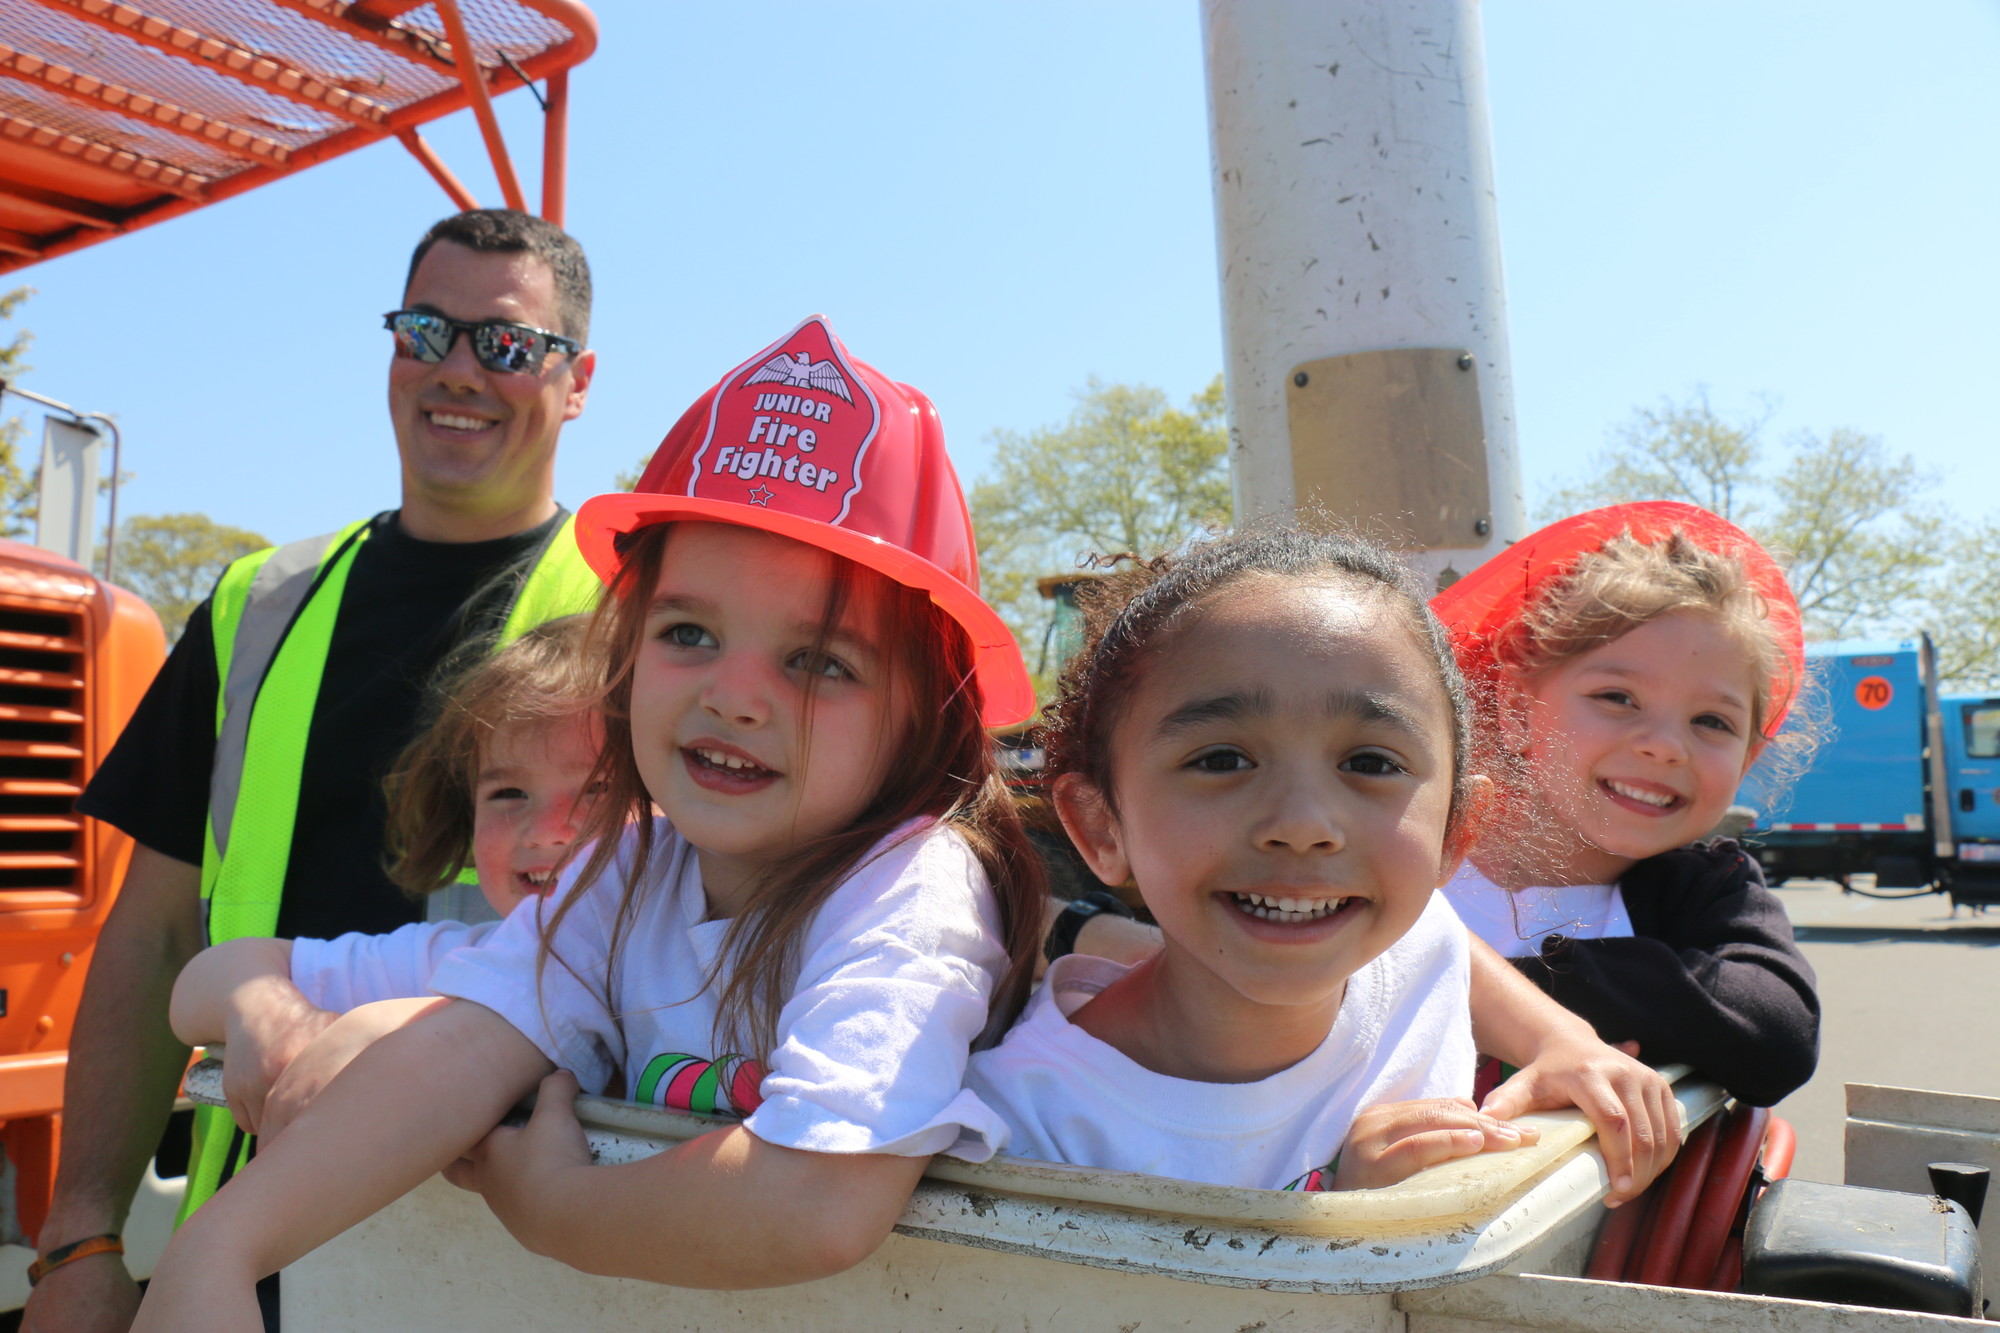 Hanging out out in the cherry picker were, from left, Briella DellItalia, 3; Emmy Manza, 3; Madeline Bitz, 4; and Mia Gilbride, 3. Behind them is village employee Joe Zuccaro.